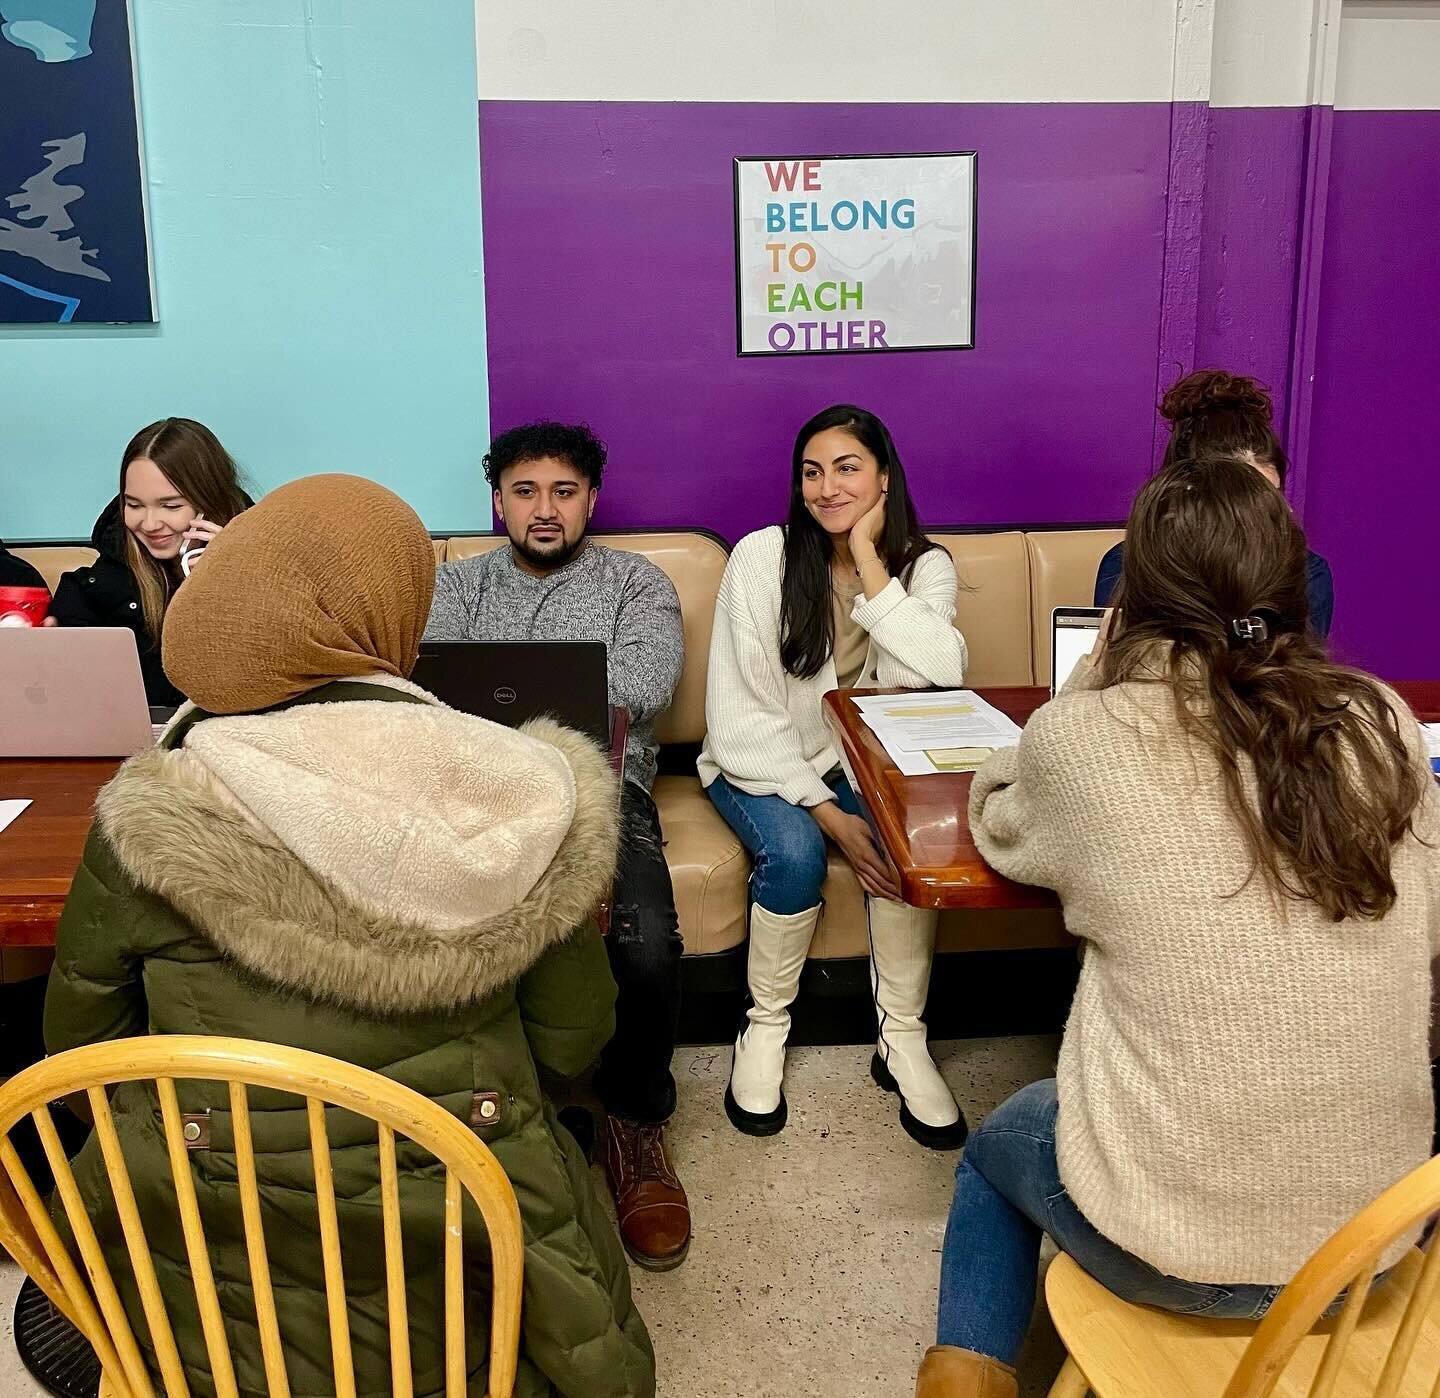 Last night, we partnered with @woodfieldcc to host a FAFSA workshop! We helped immigrant students complete their applications and it was an amazing way to connect with our community! 🫶

We appreciate those who came out yesterday, and for WCC to allo